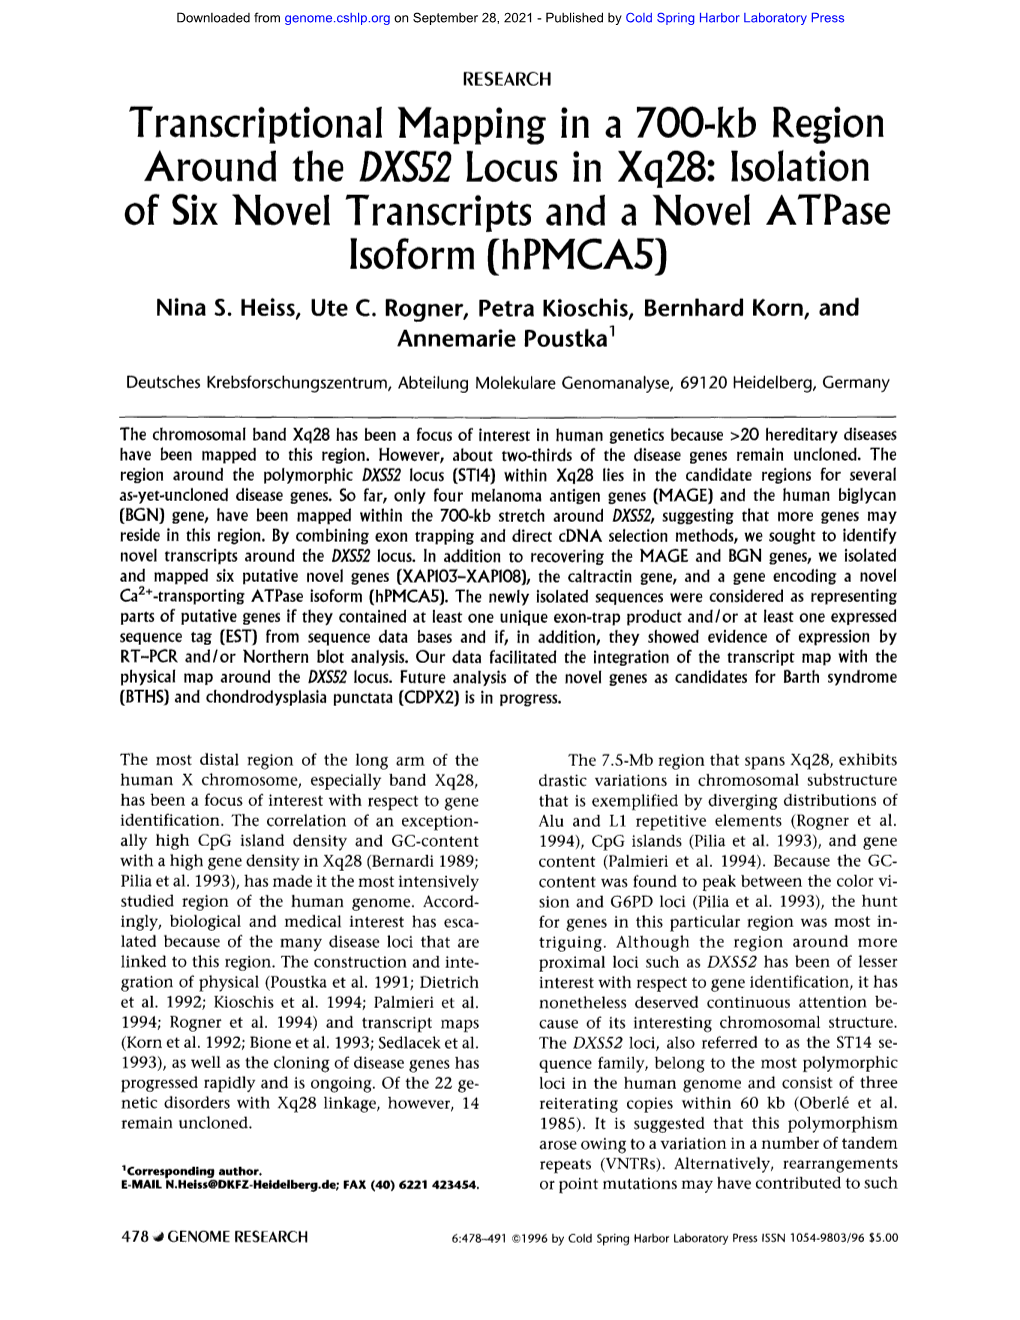 Transcriptional Mapping in a 700-Kb Region Around the DXS52 Locus in Xq28: Isolation of Six Novel Transcripts and a Novel Atpase Lsoform (Hpmcas) Nina S